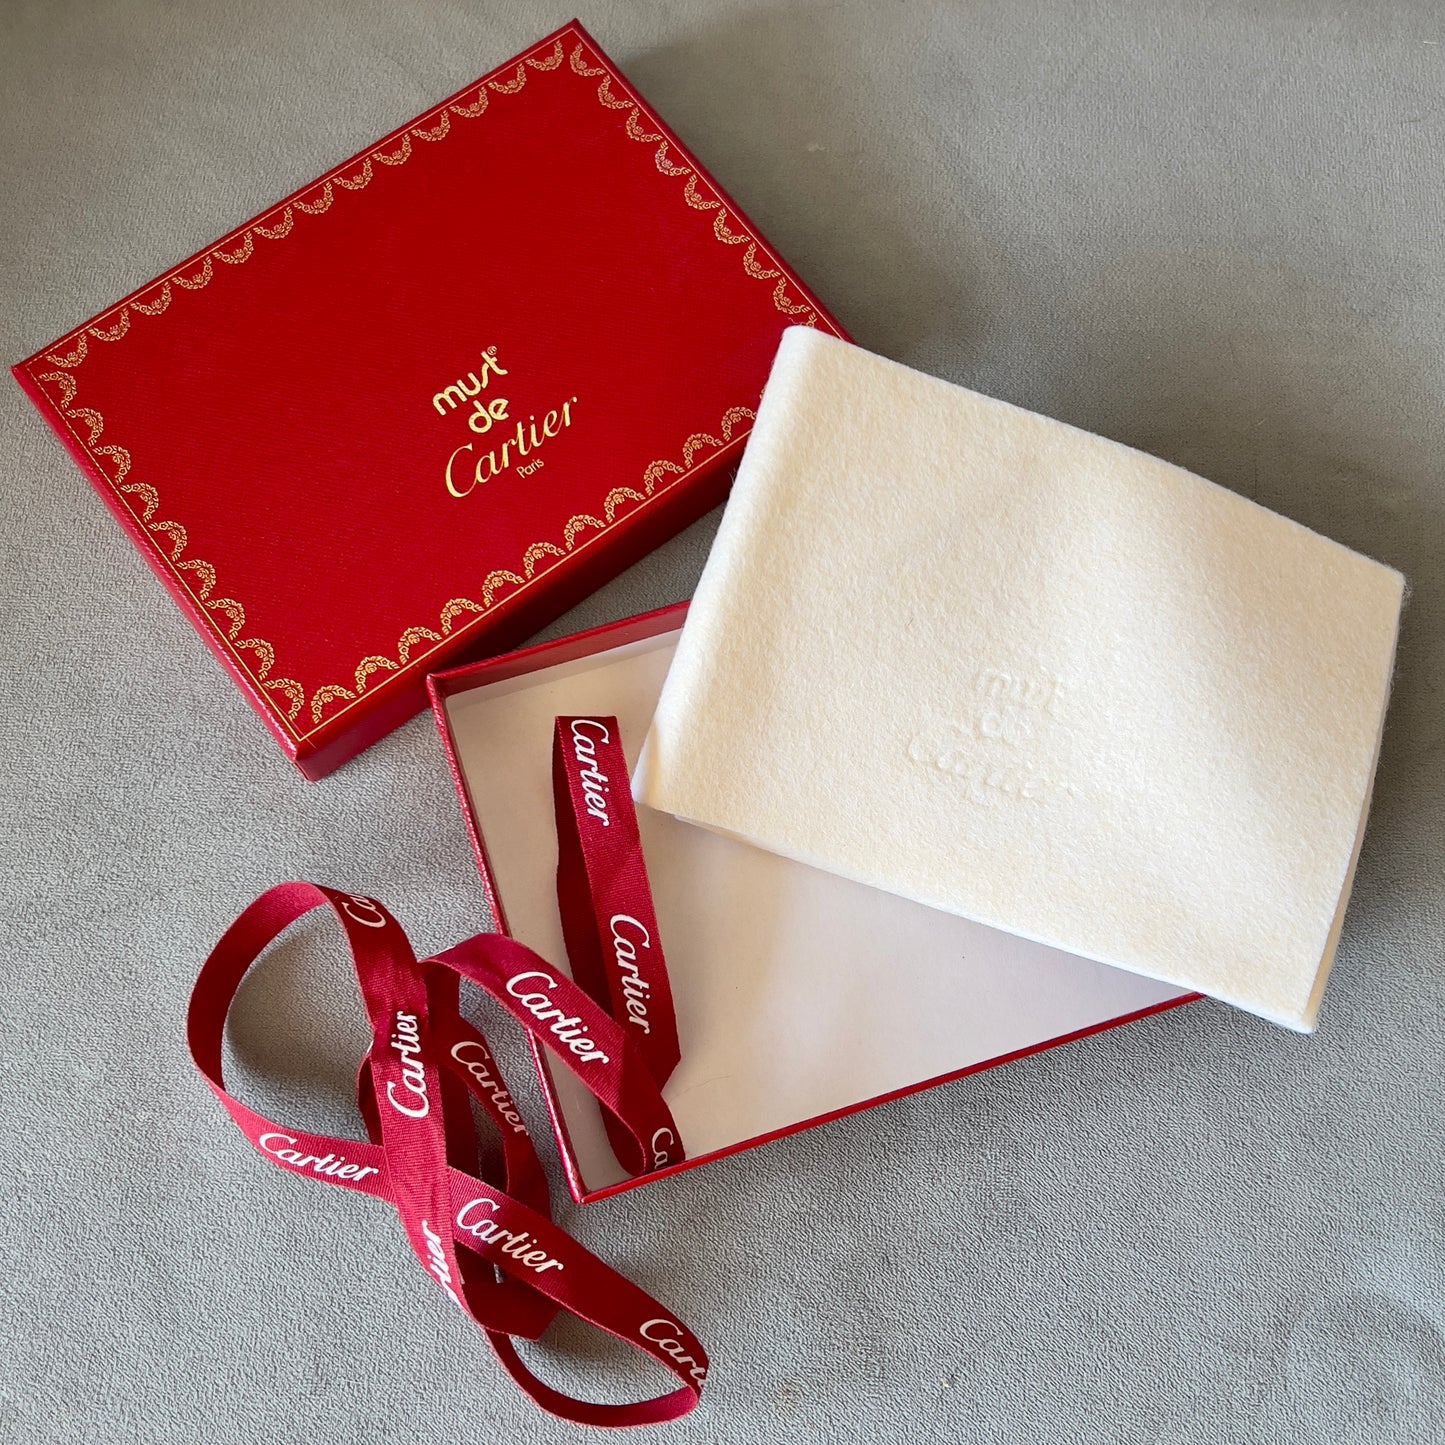 CARTIER Leather Goods Box 6.20x4.5x1.10 inches + Wrapping Cloth + Ribbon